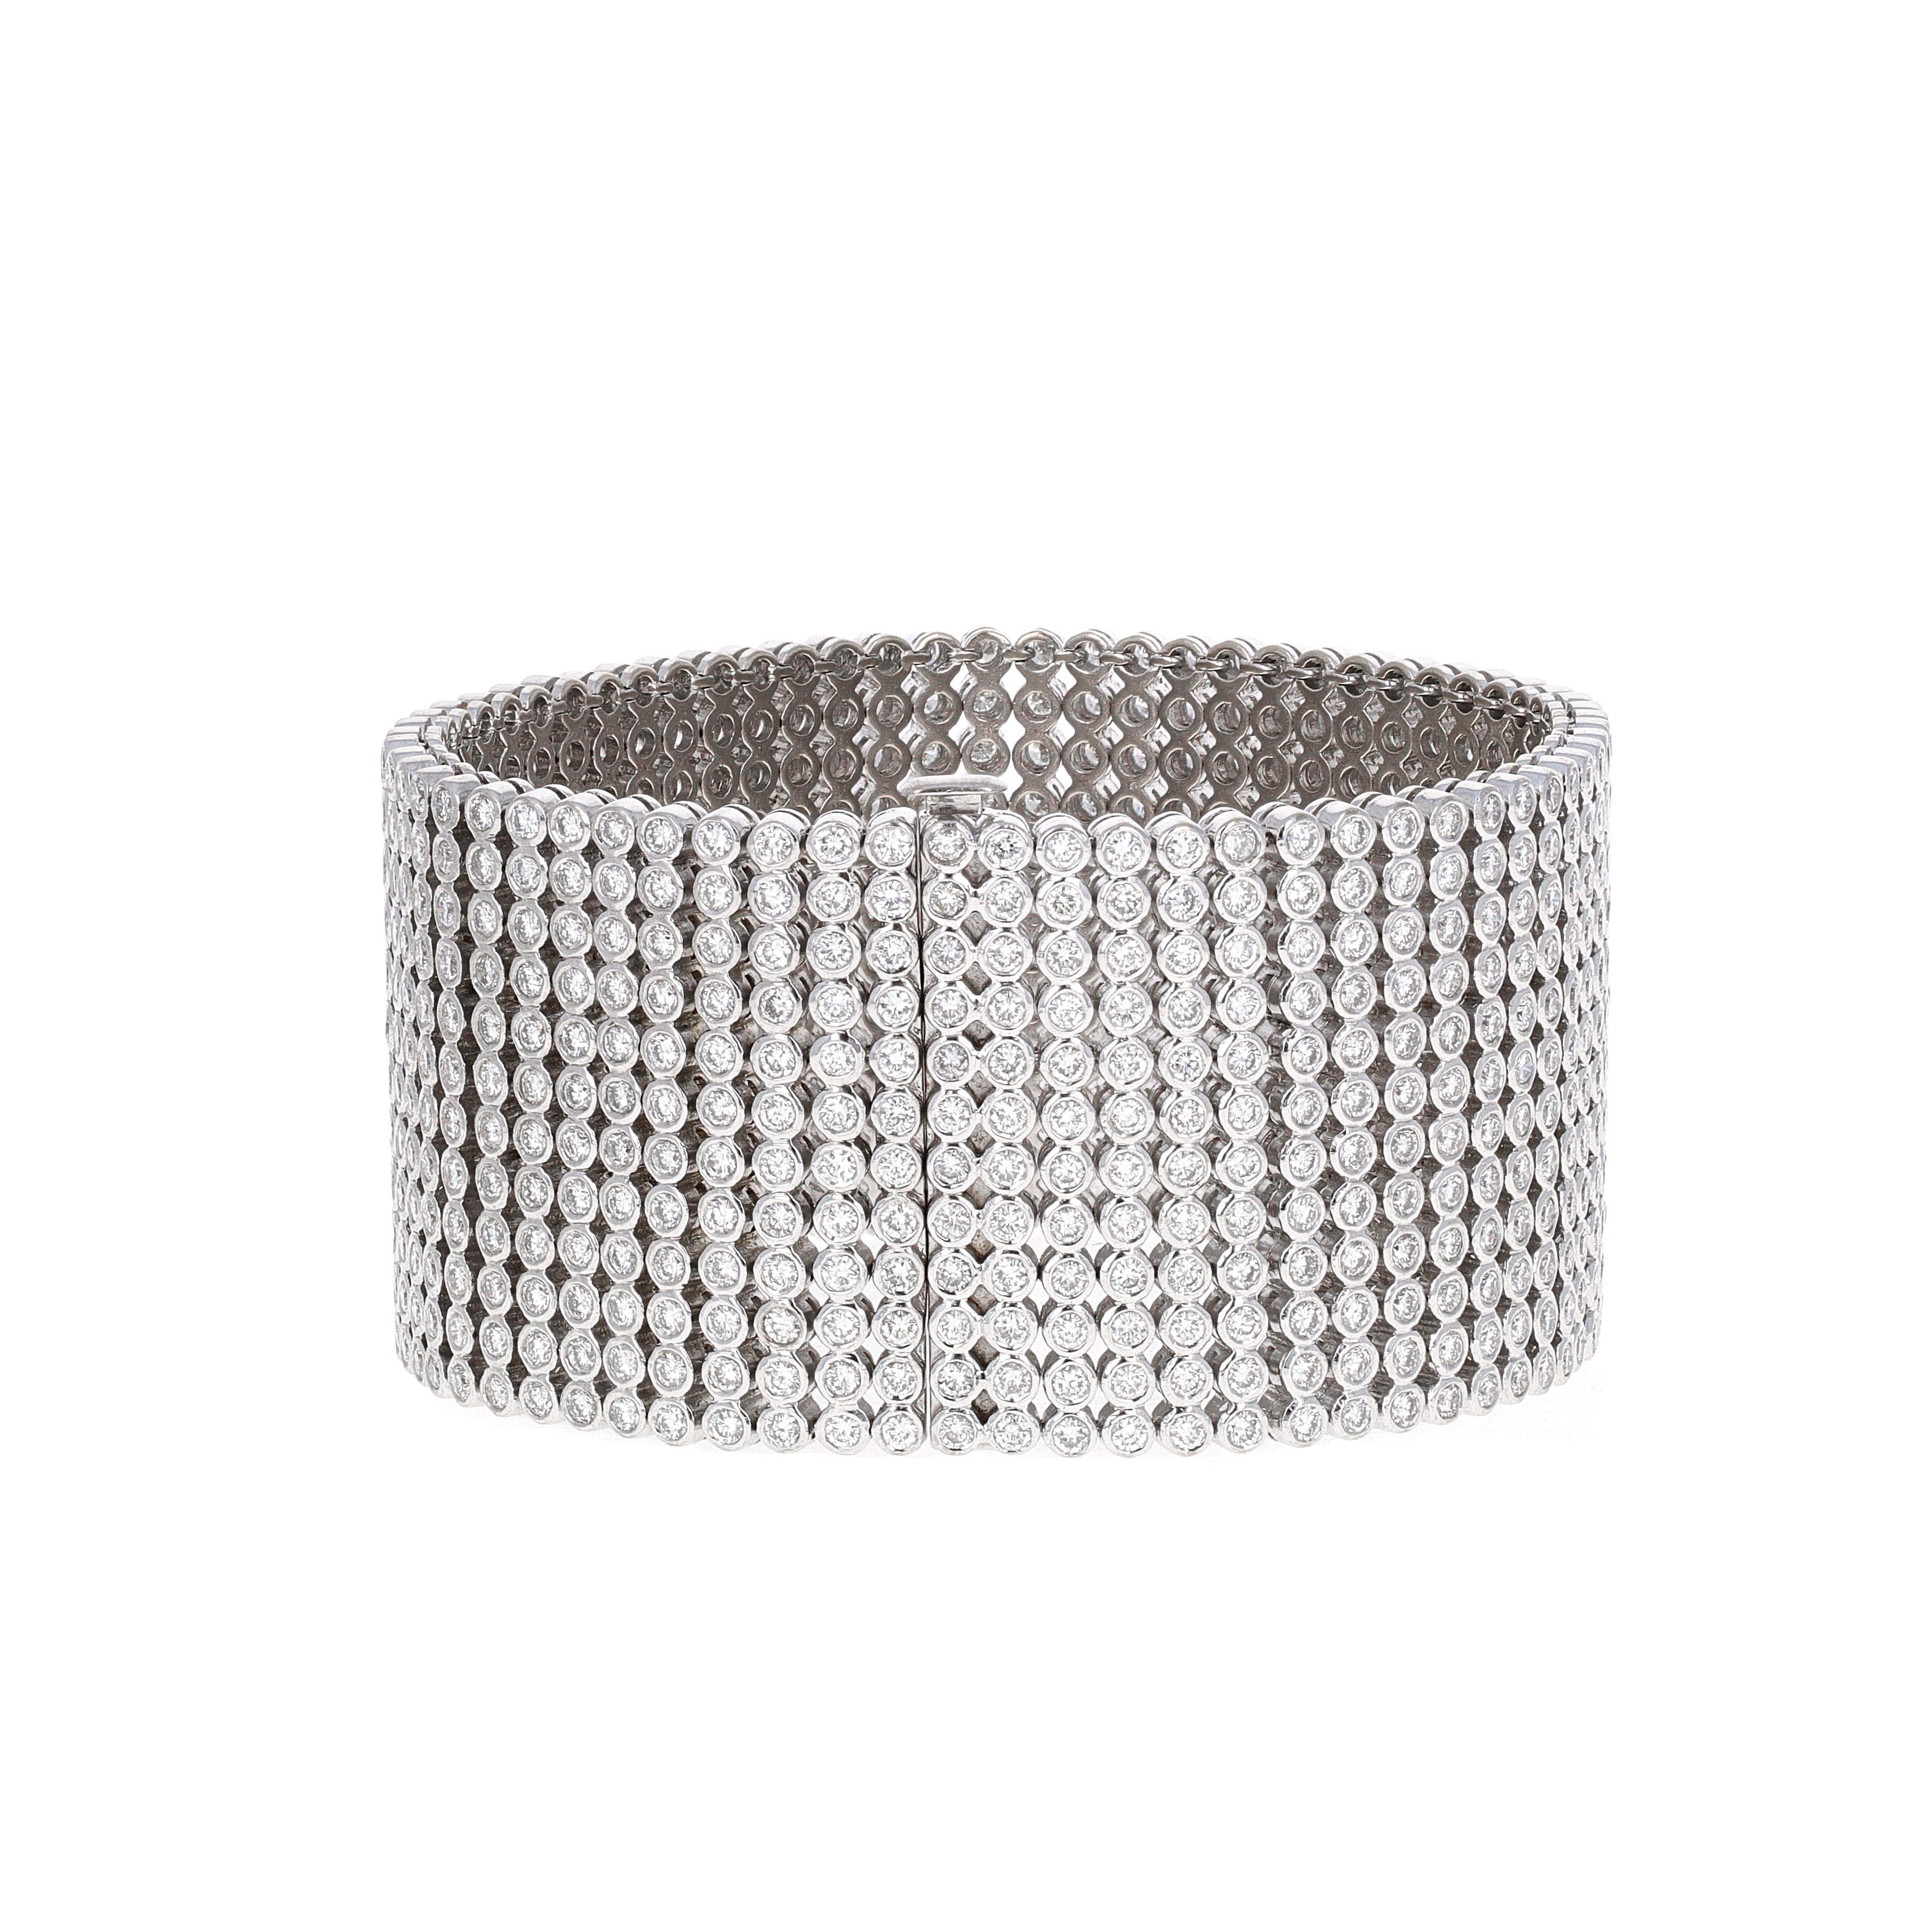 18k white gold 27.50-carat wide diamond tennis bracelet cuff.  The diamonds are round brilliant cut G-H color and VS- SI clarity. Each of the 744 diamonds are bezel set, making the movement and fluidity of this bracelet perfect.
The 744 diamonds